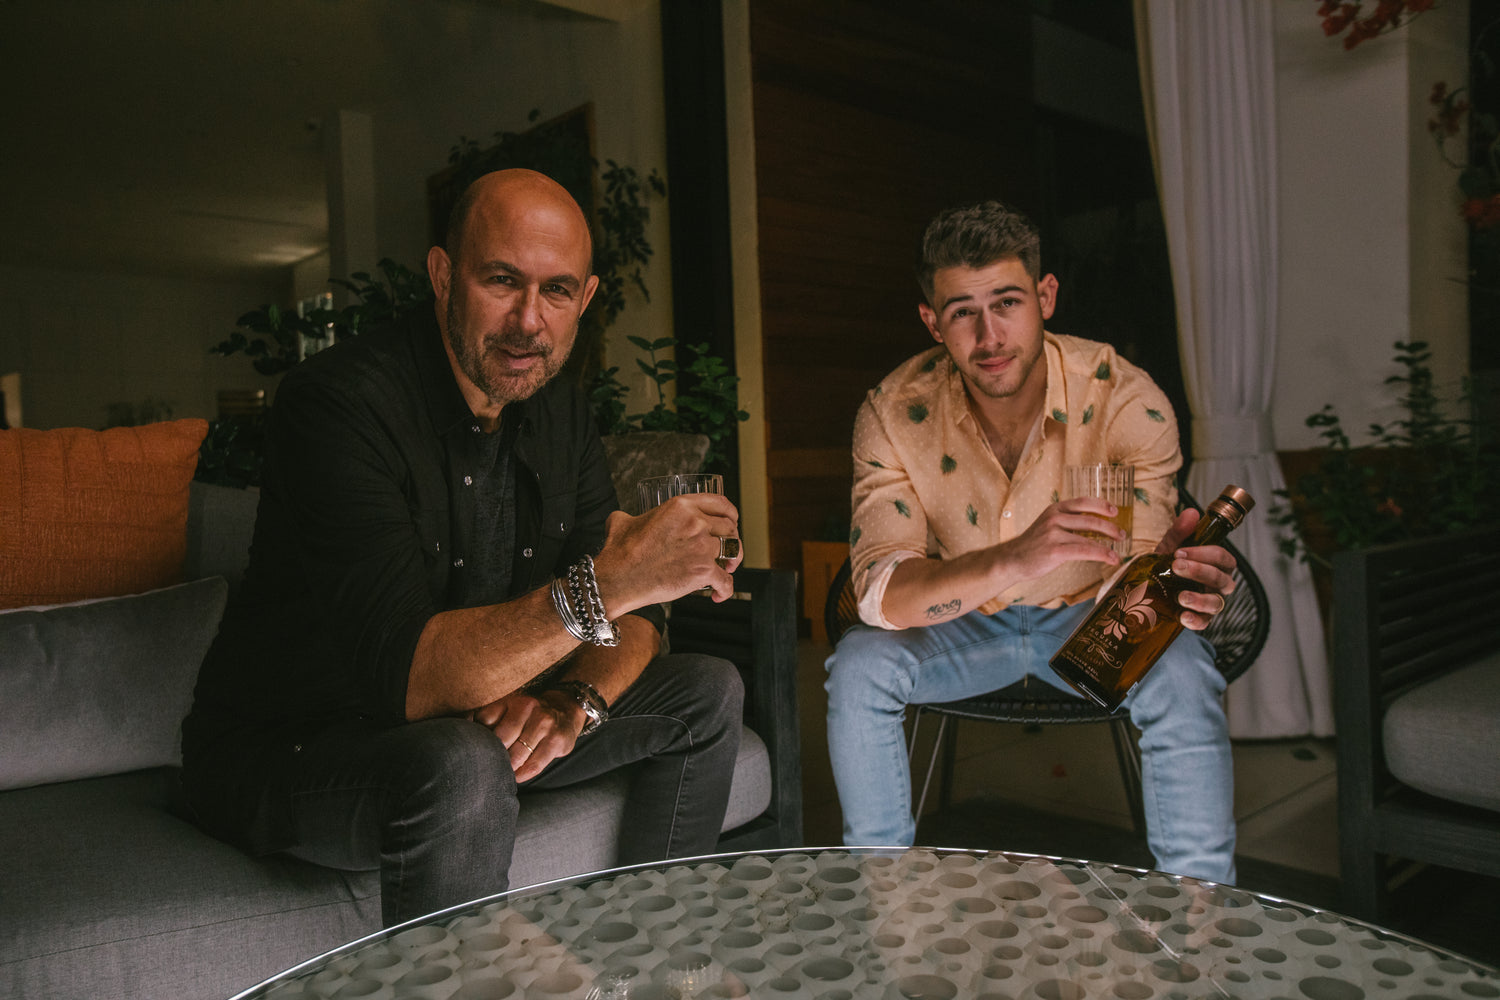 Villa One™ is an ultra-premium, hand-crafted tequila founded by Nick Jonas and John Varvatos.